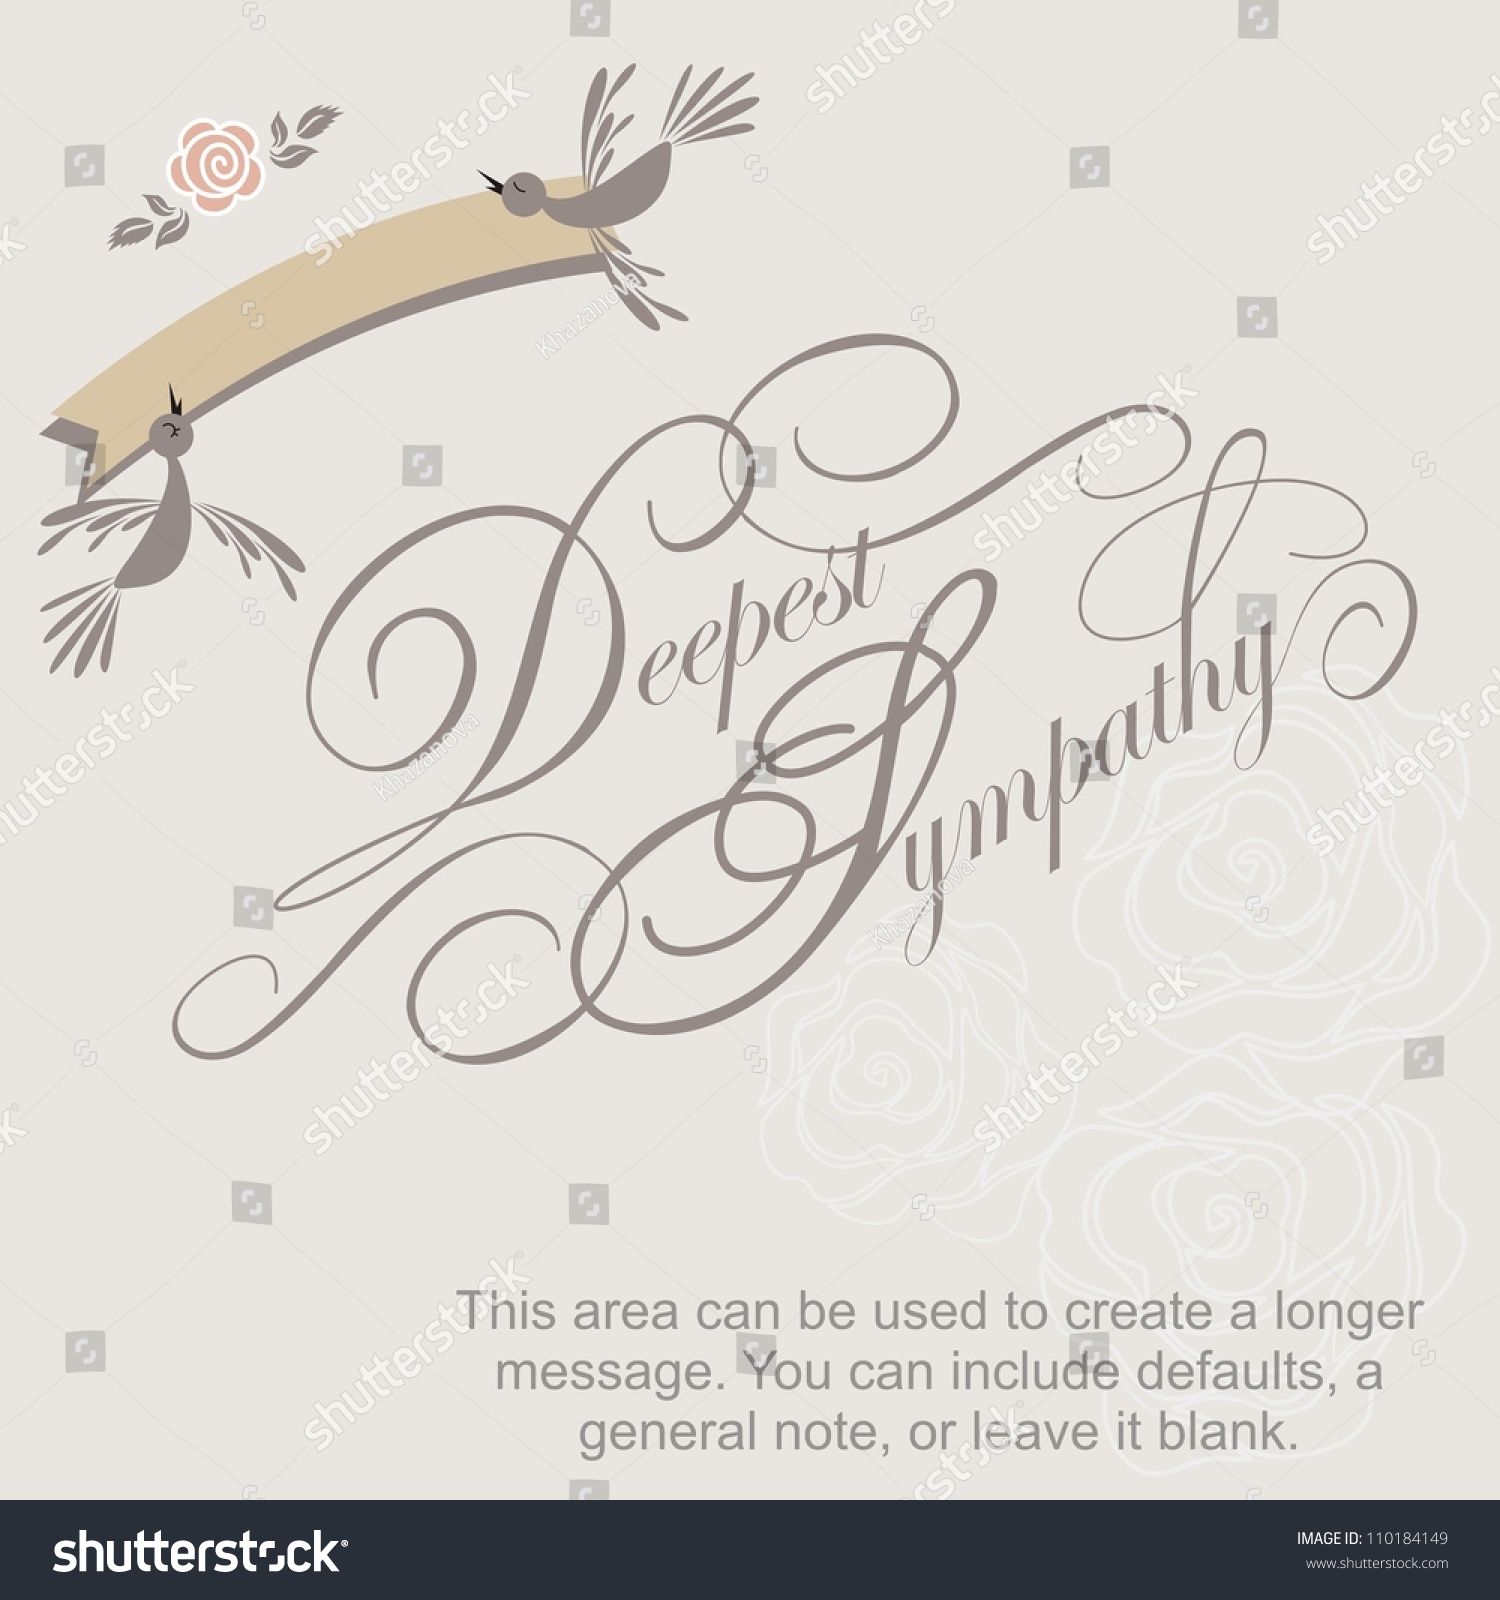 free deepest sympathy clipart - photo #47